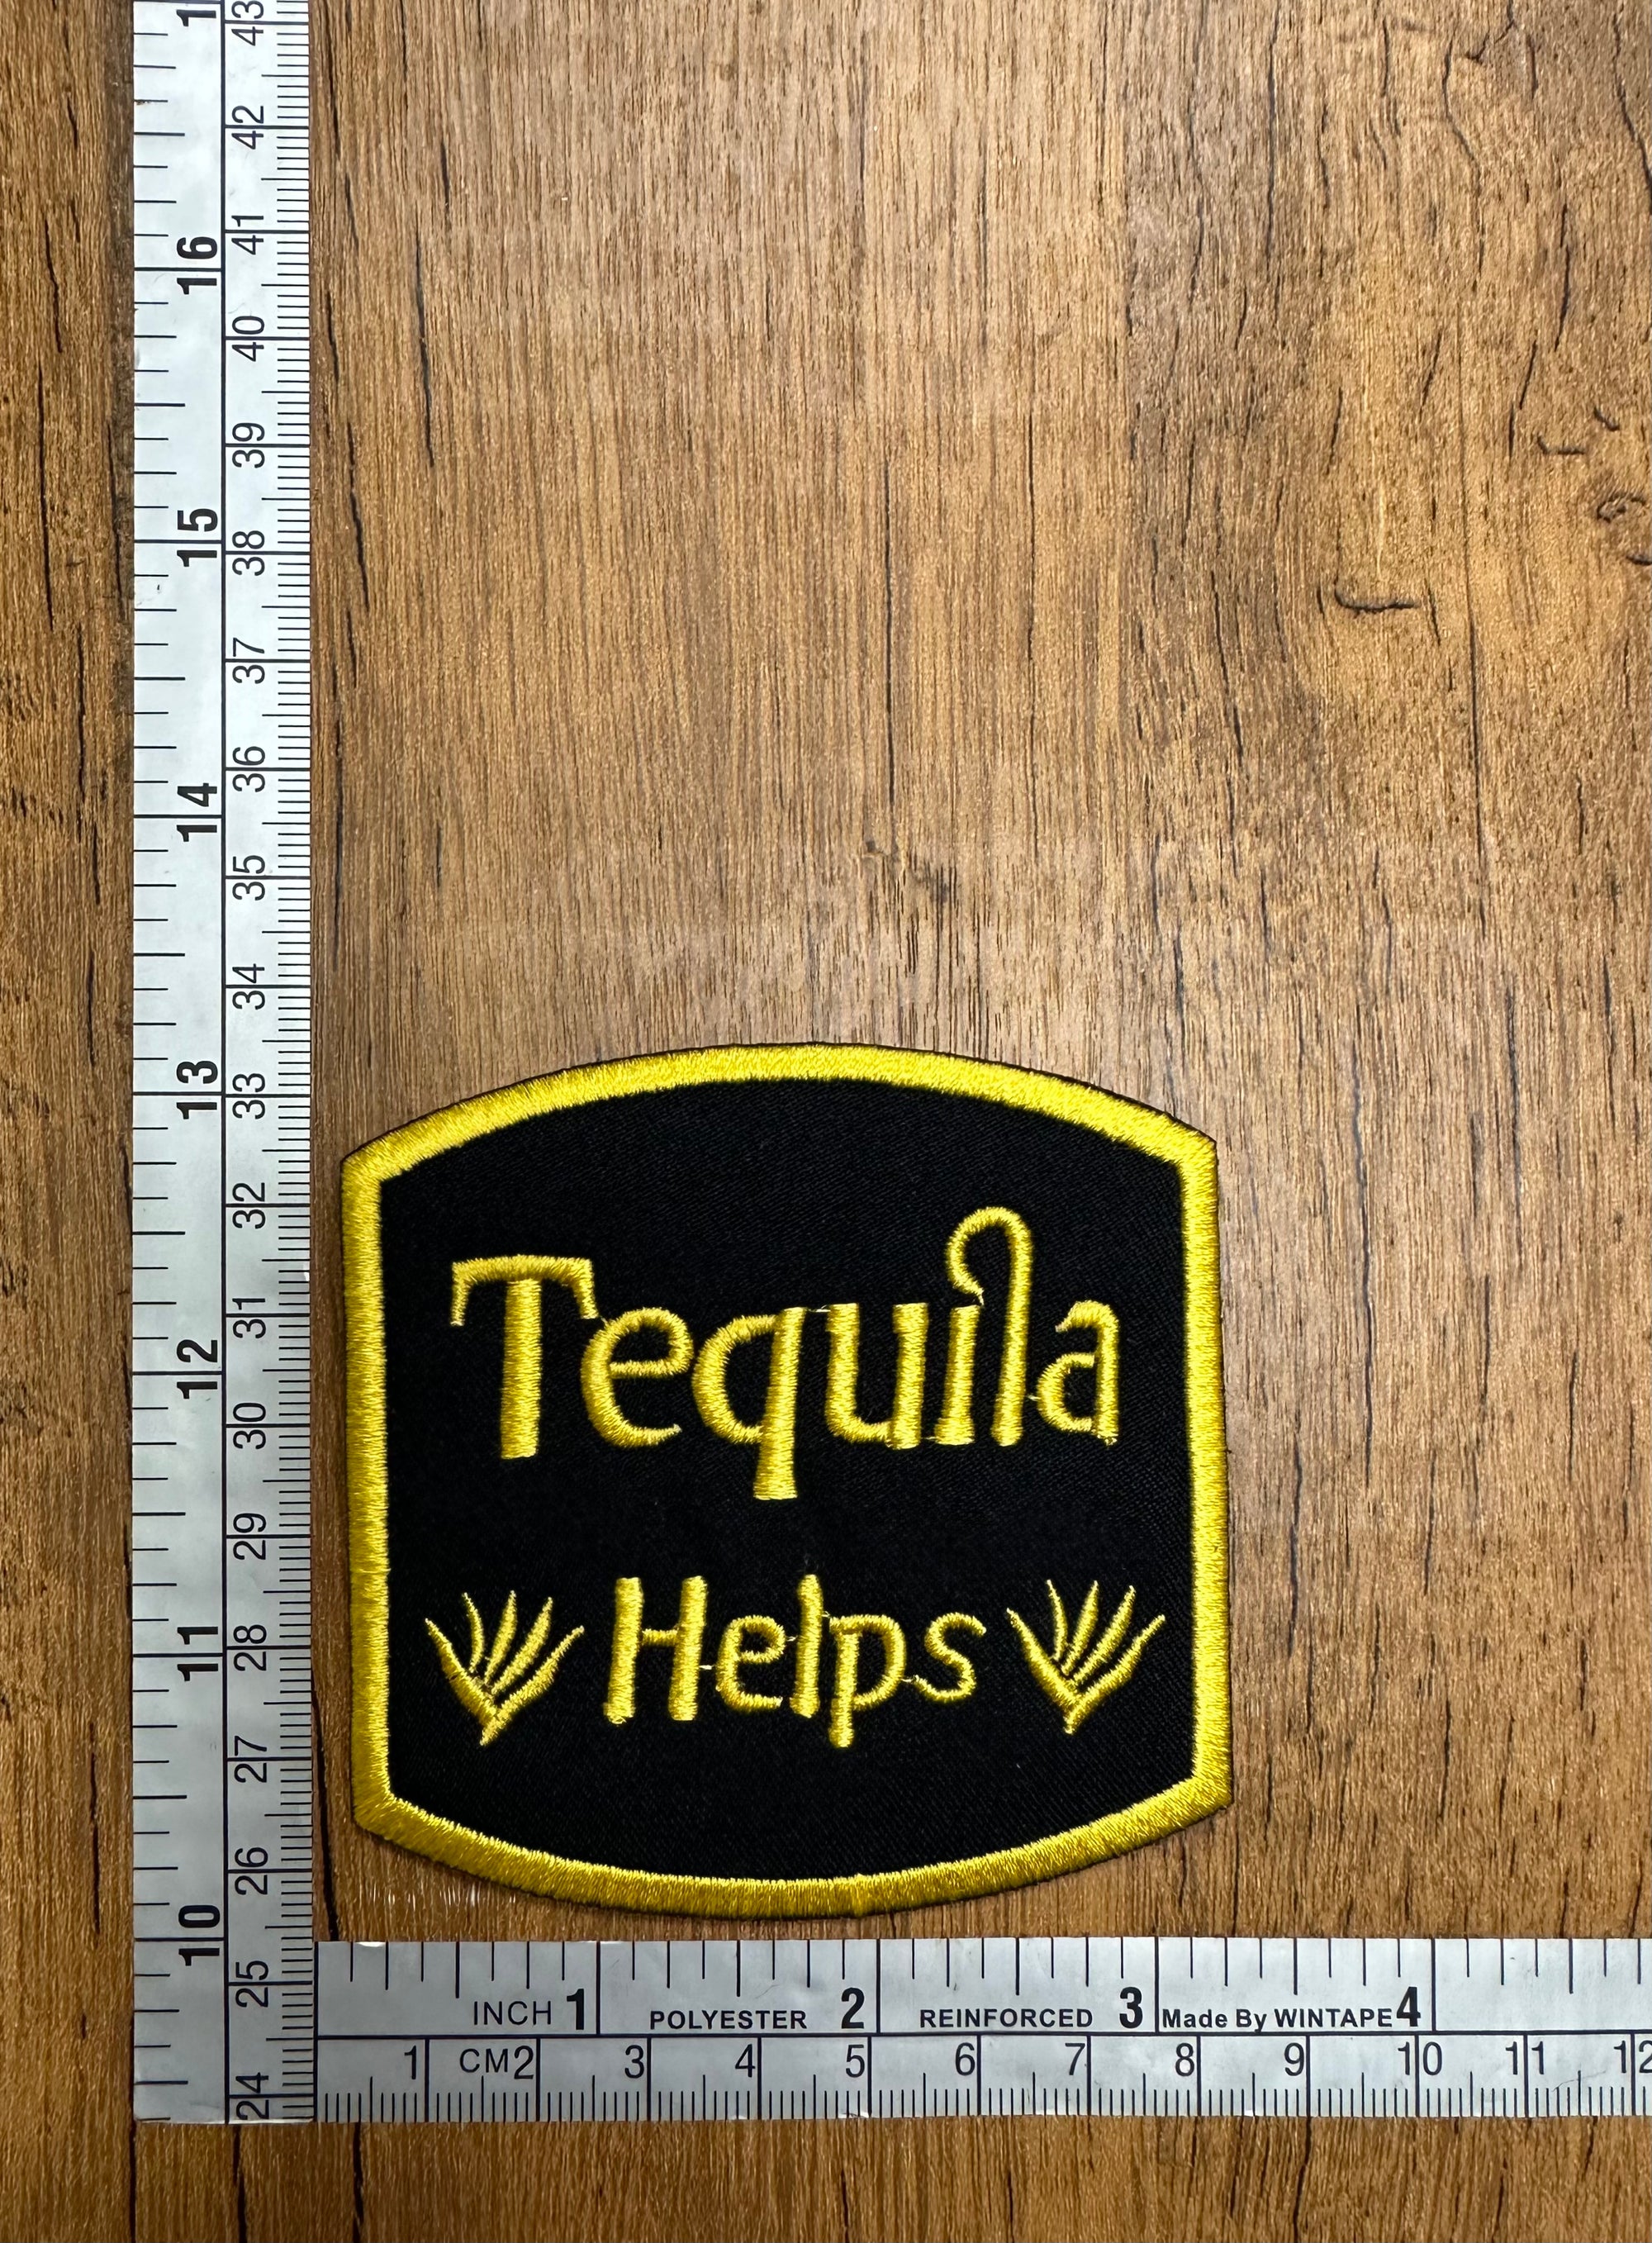 Tequila Helps - Large